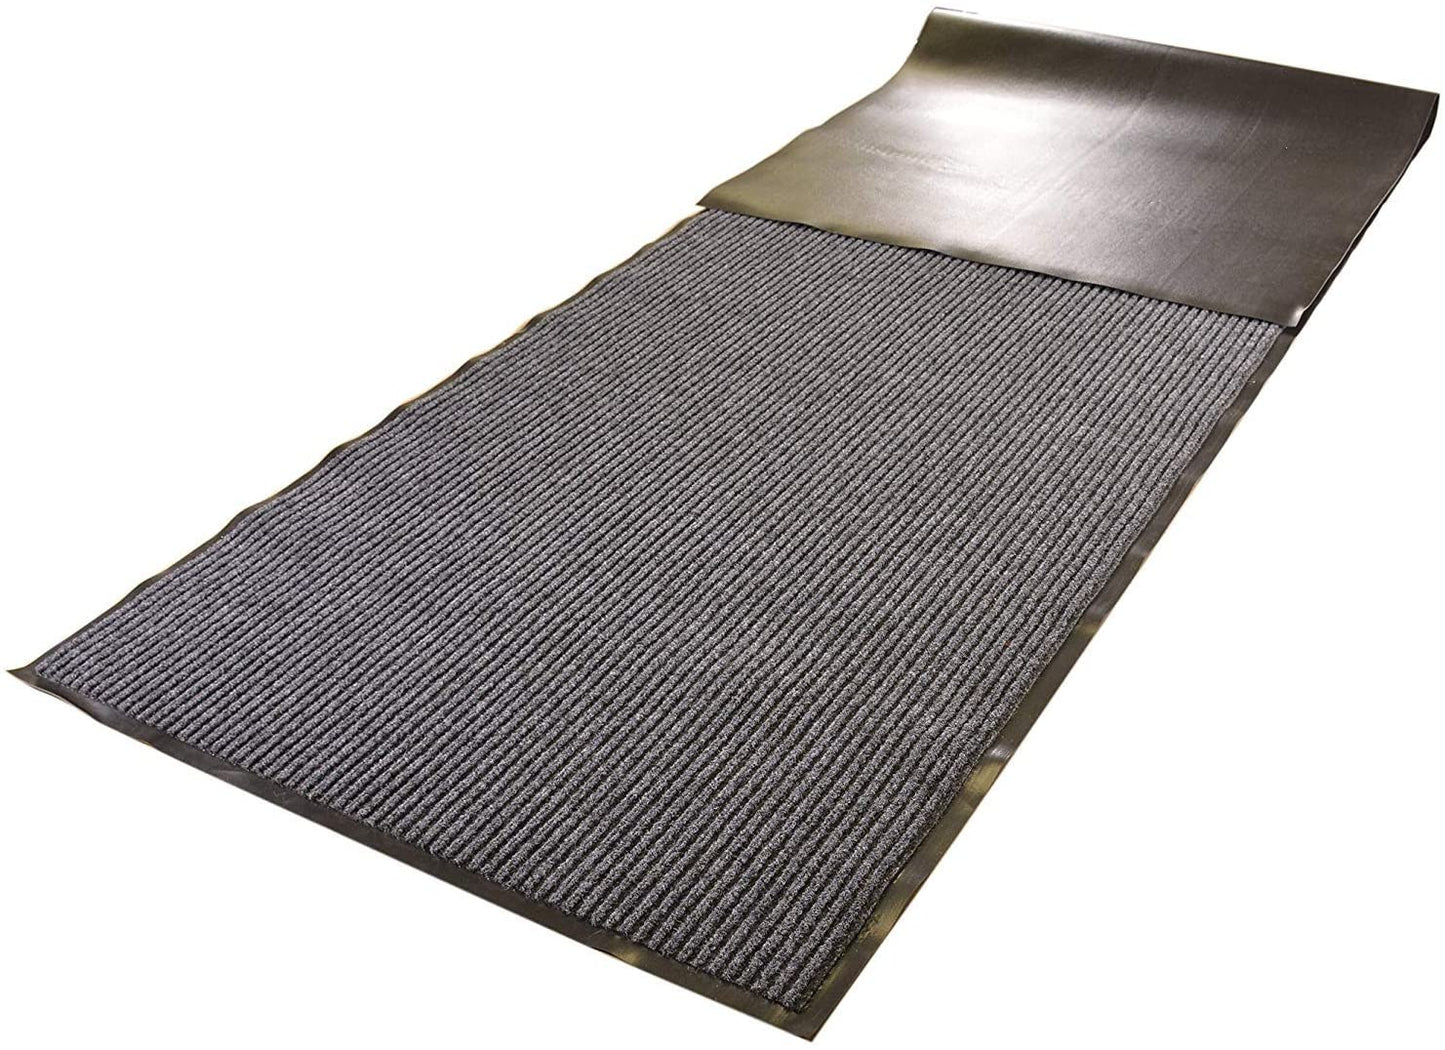 Entry Mat With Ridges Extended Rubber Edges Slip Skid Resistant PVC Backing Commercial Grade (Grey, 3' x 8')